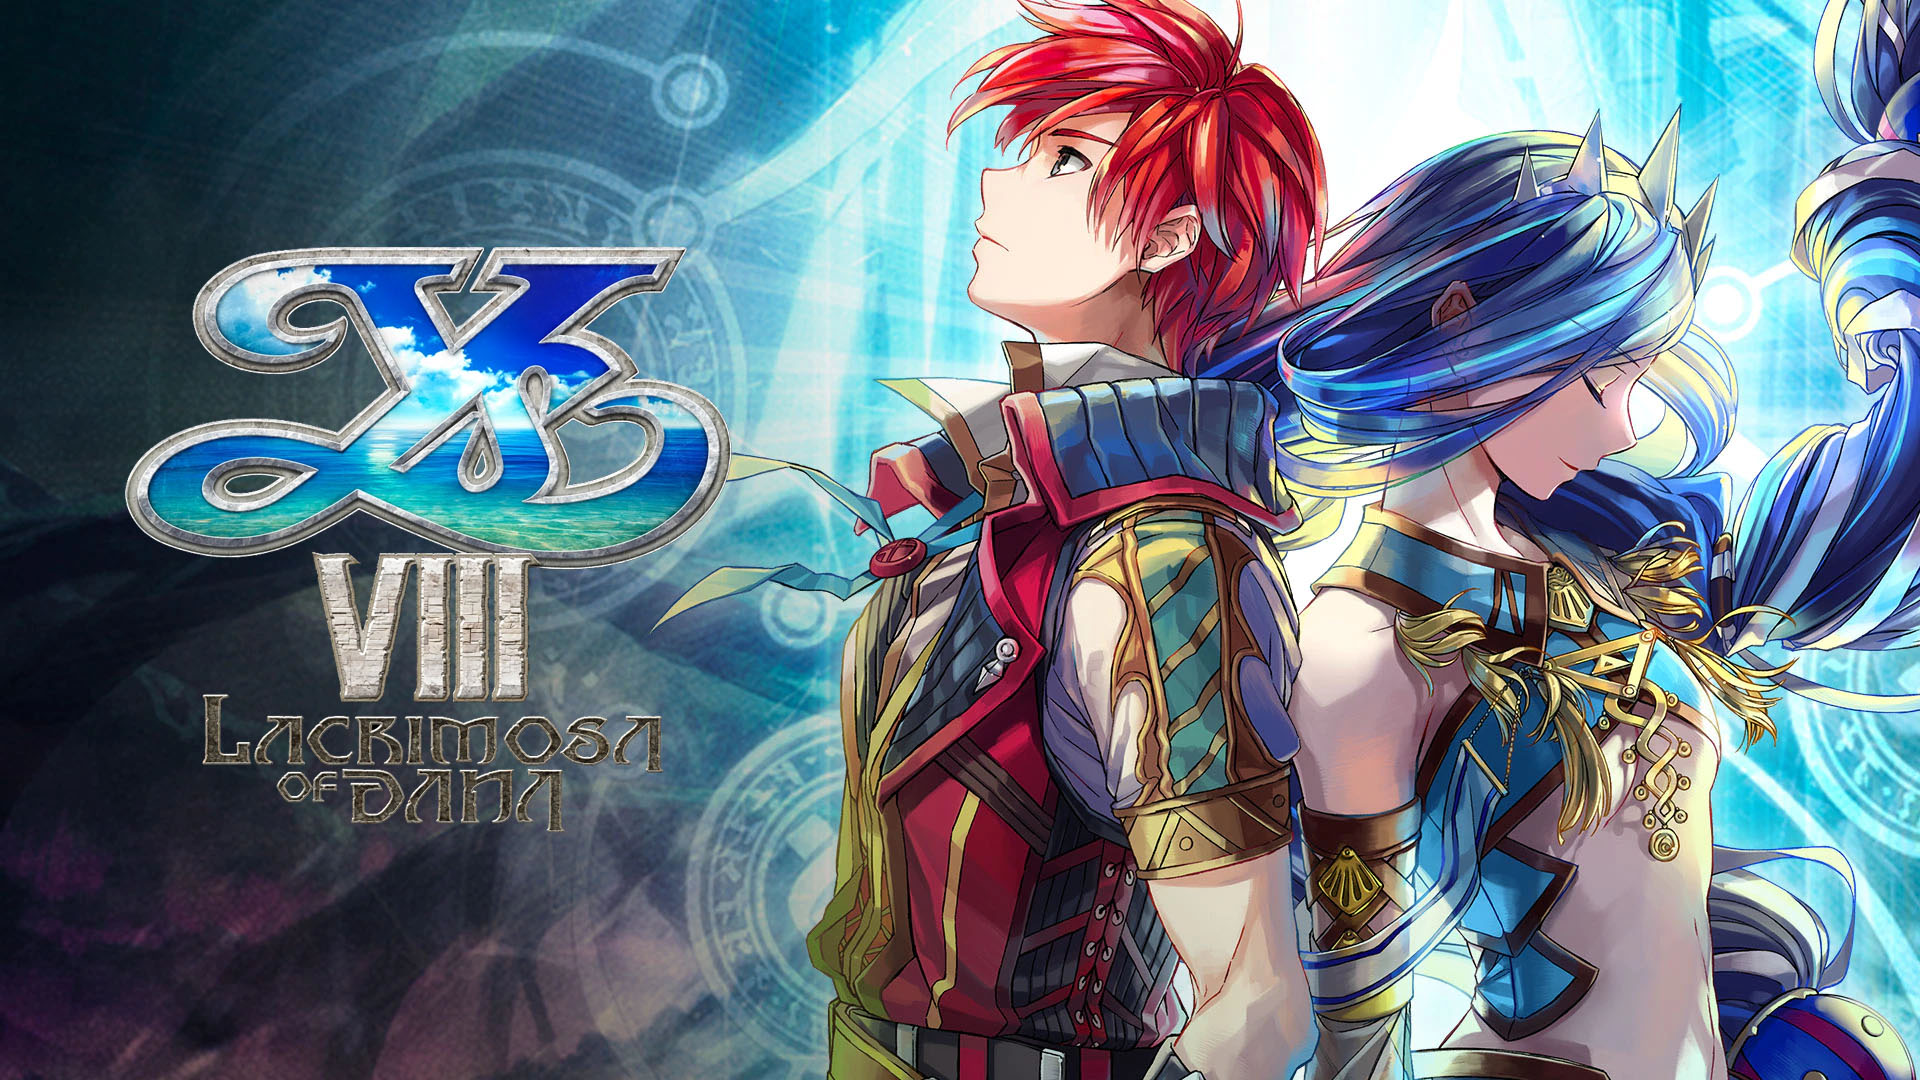 Ys VIII launches for PS5 in November in the west